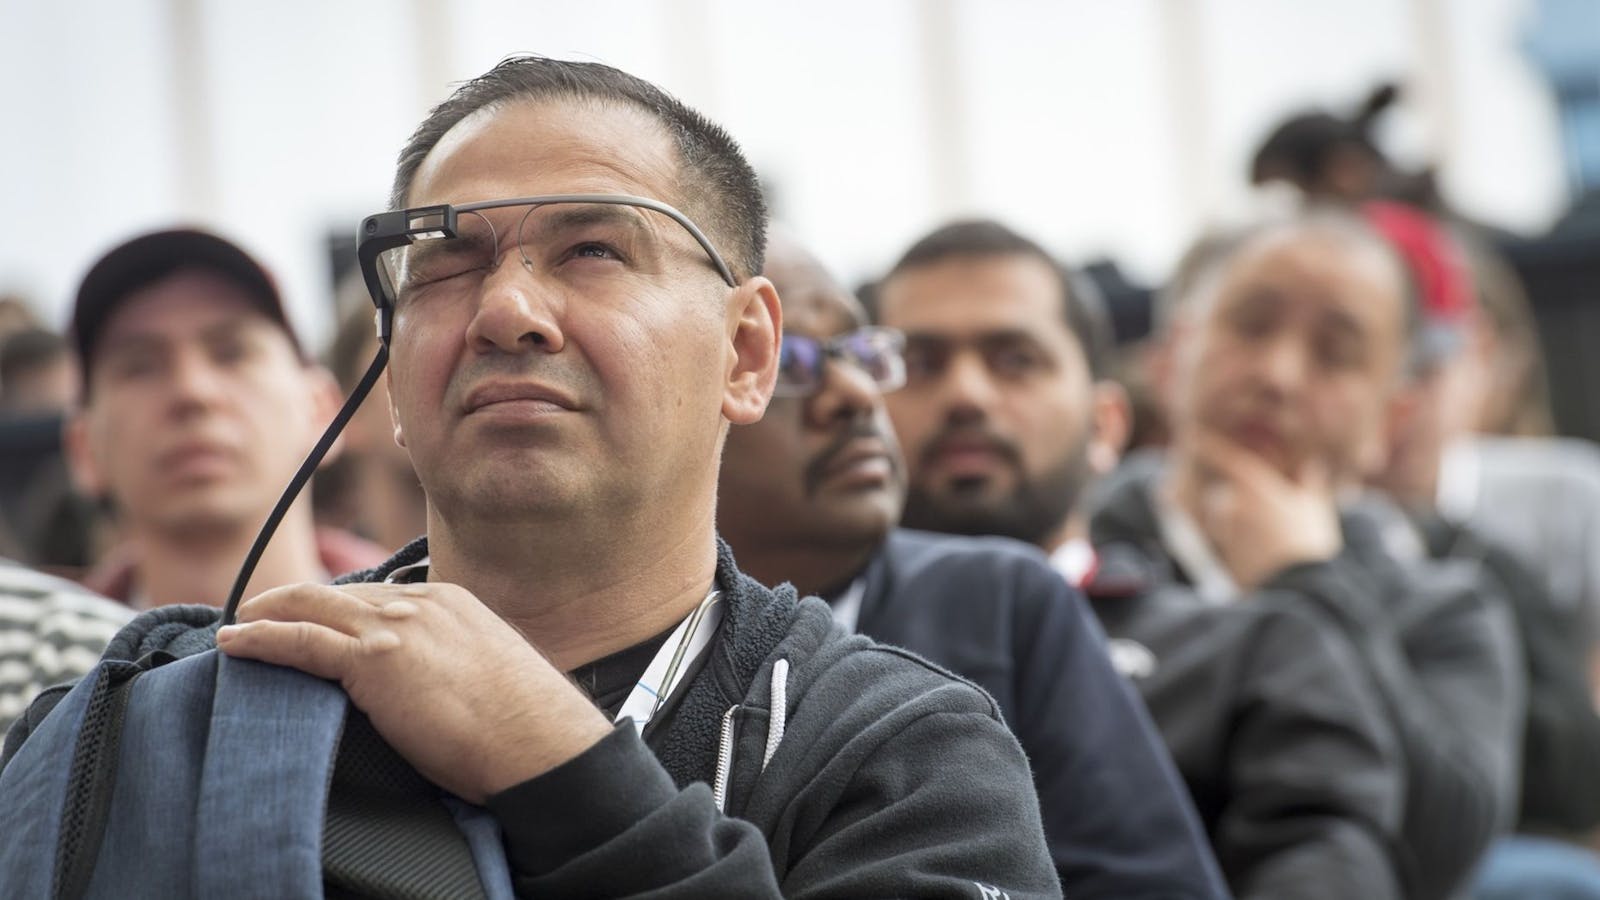 An attendee using Google Glass at 2019's I/O conference. Photo: Bloomberg.